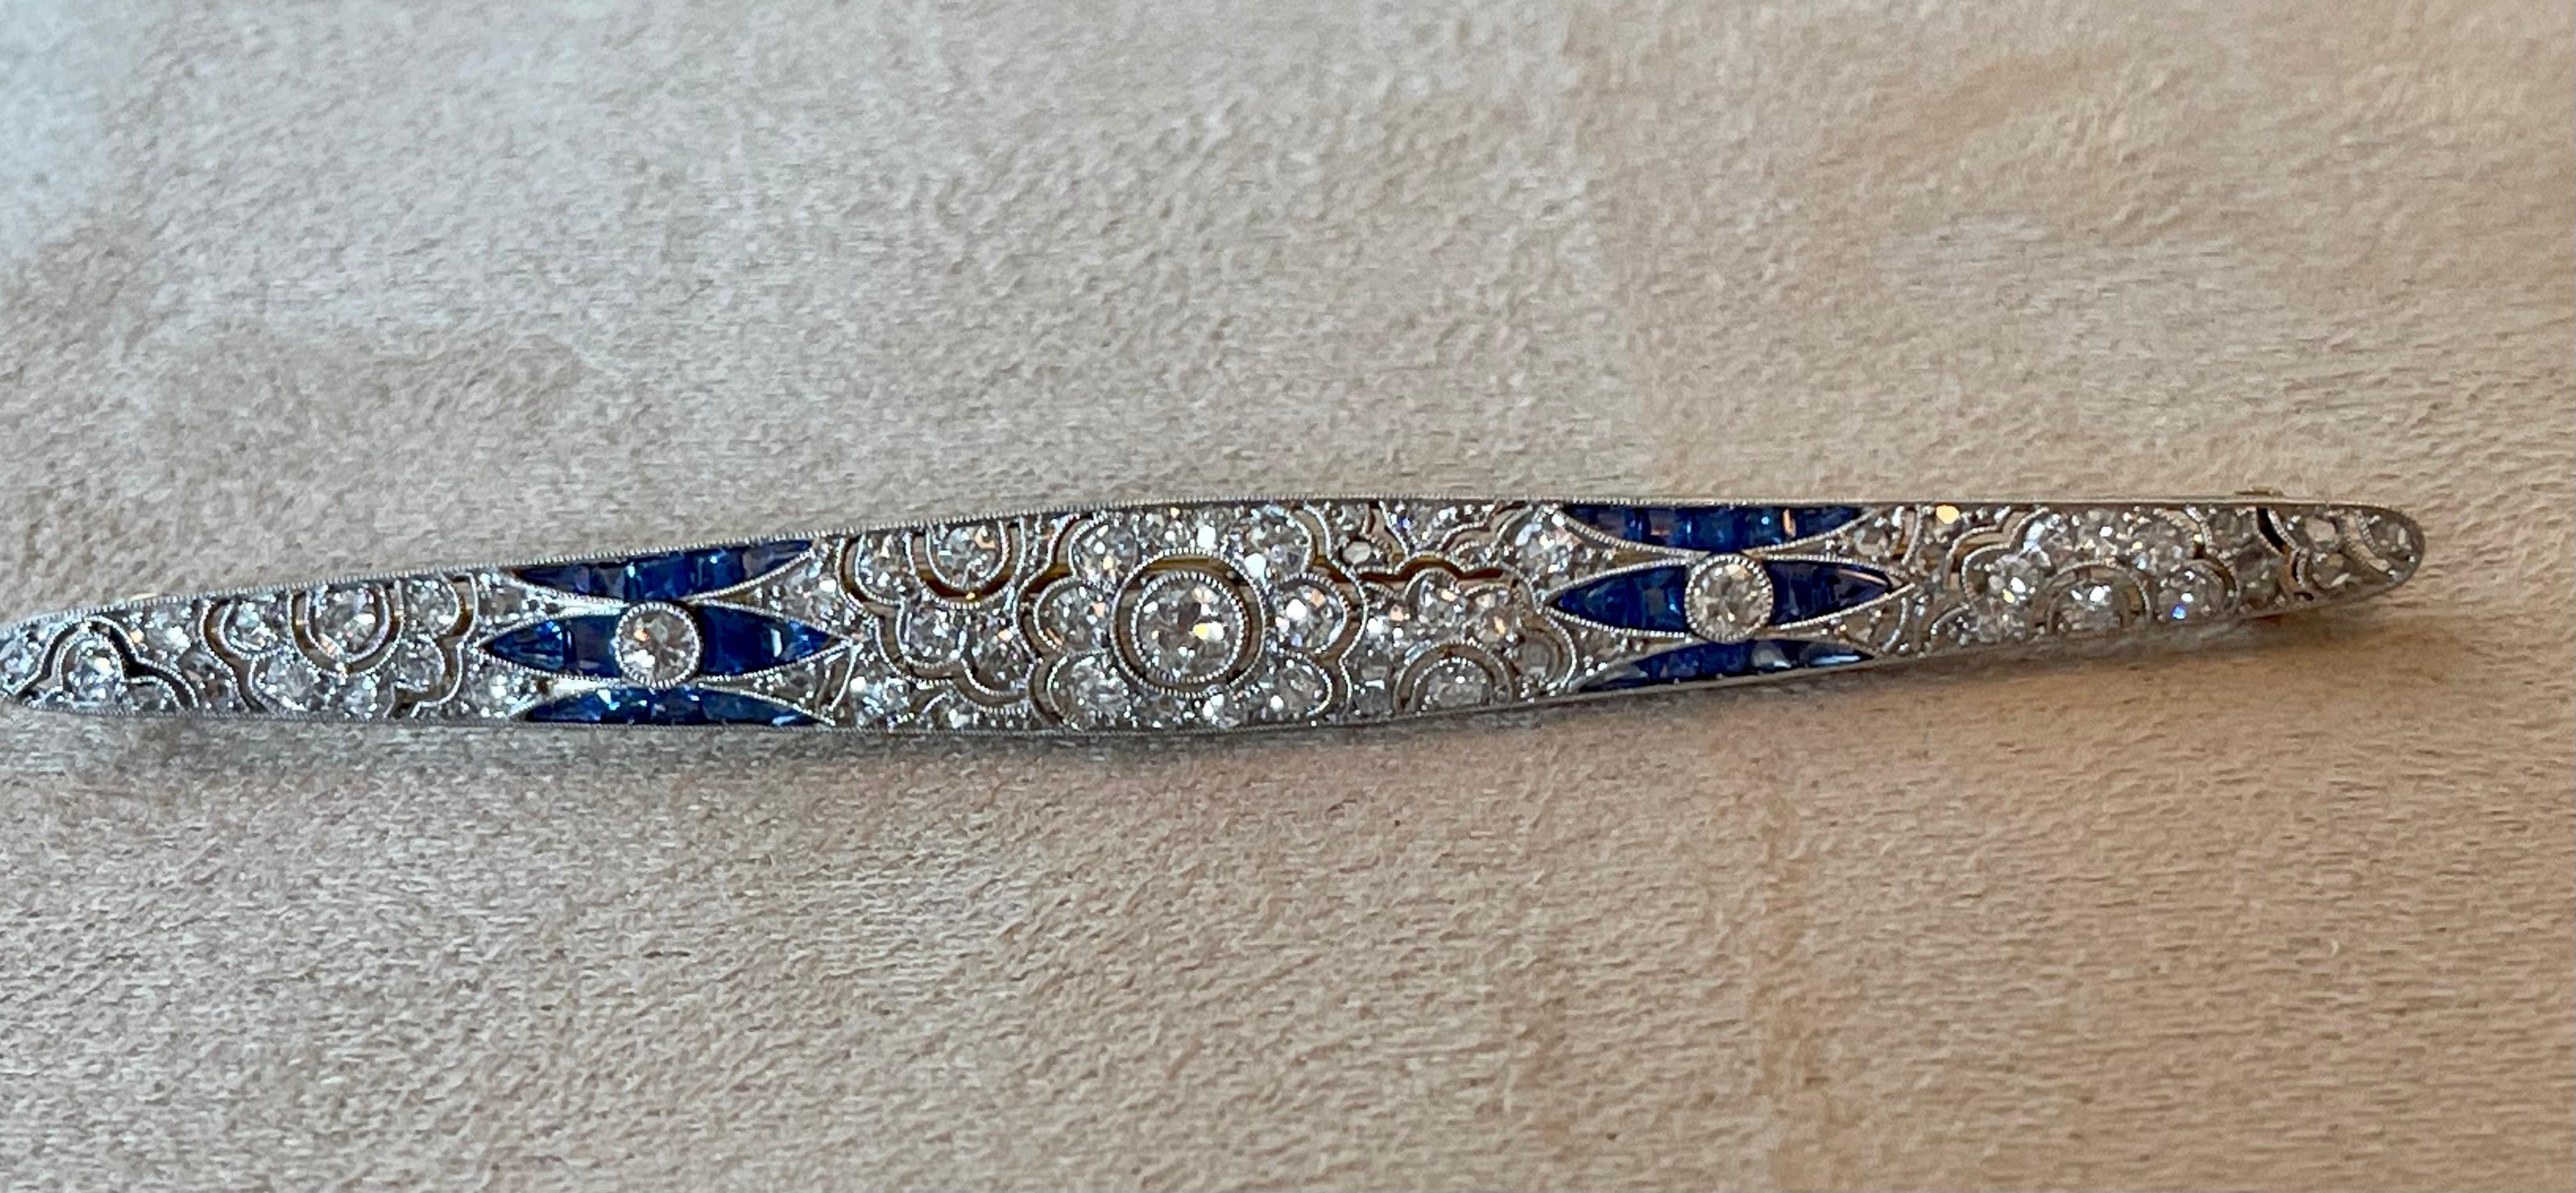 Lovely longish  bar brooch, in 18 K yellow Gold and Platinum, set with 62 brilliant cut Diamonds weighing approximately 0.90 ct and calibré cut Sapphires in an exquuisite filigree open work setting with fine milgrain. 
8 cm long and 0.78 cm wide.